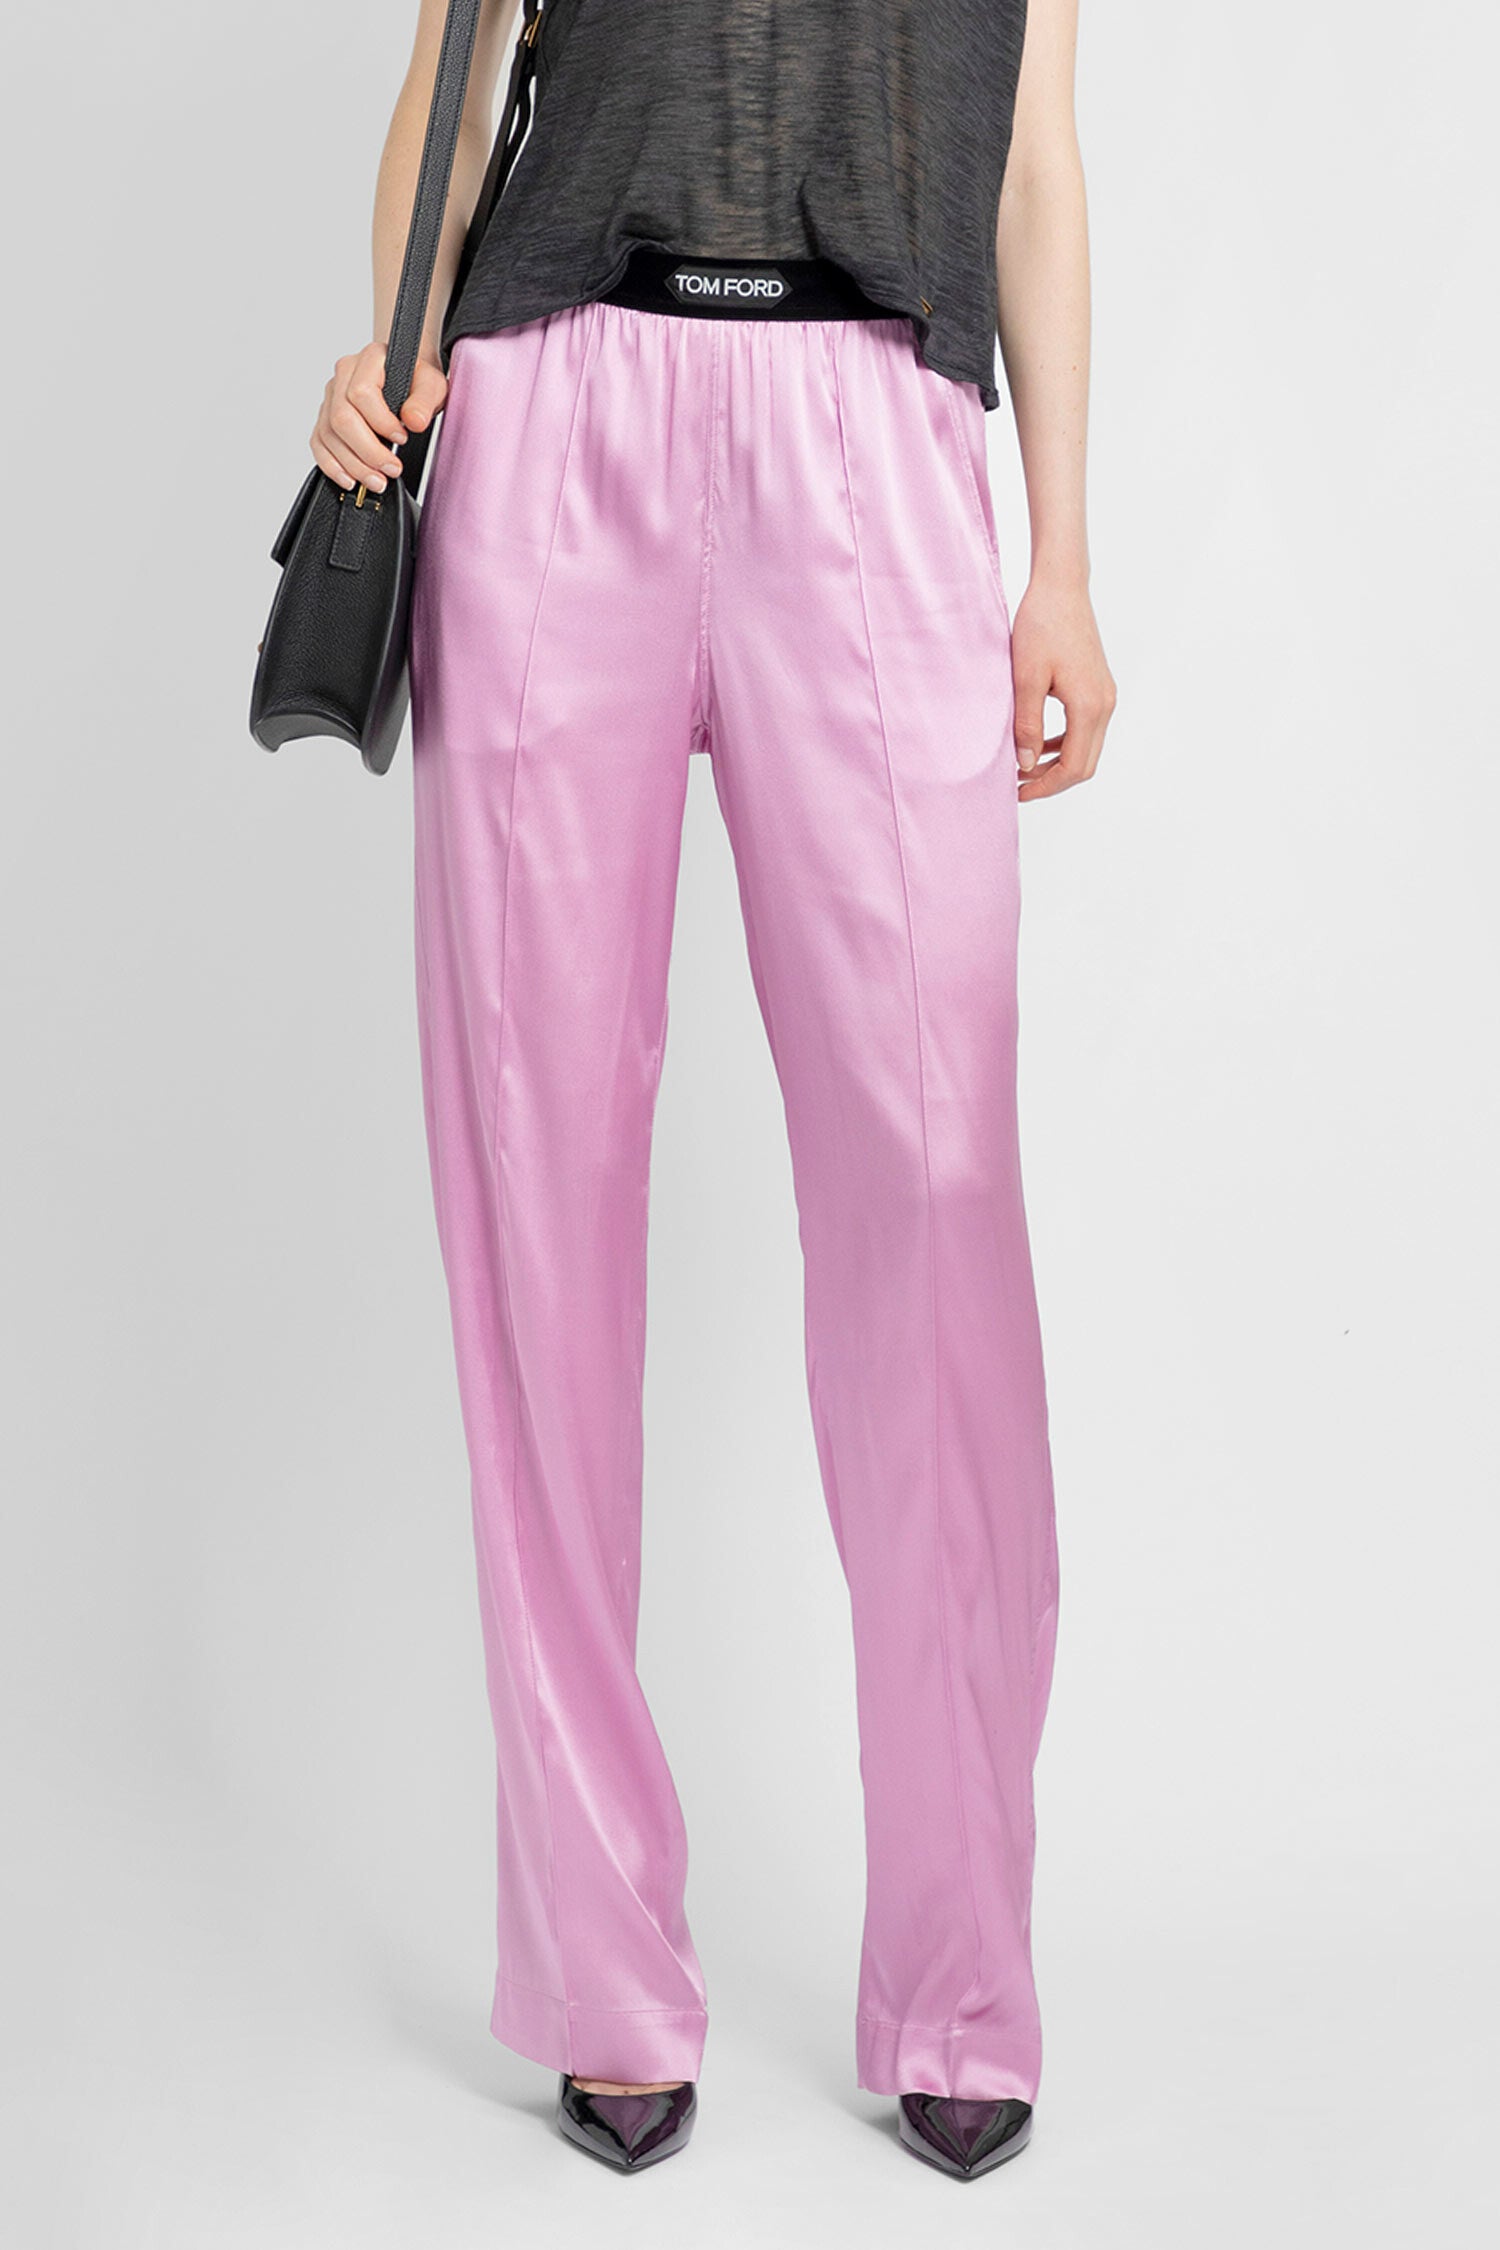 TOM FORD WOMAN PINK TROUSERS